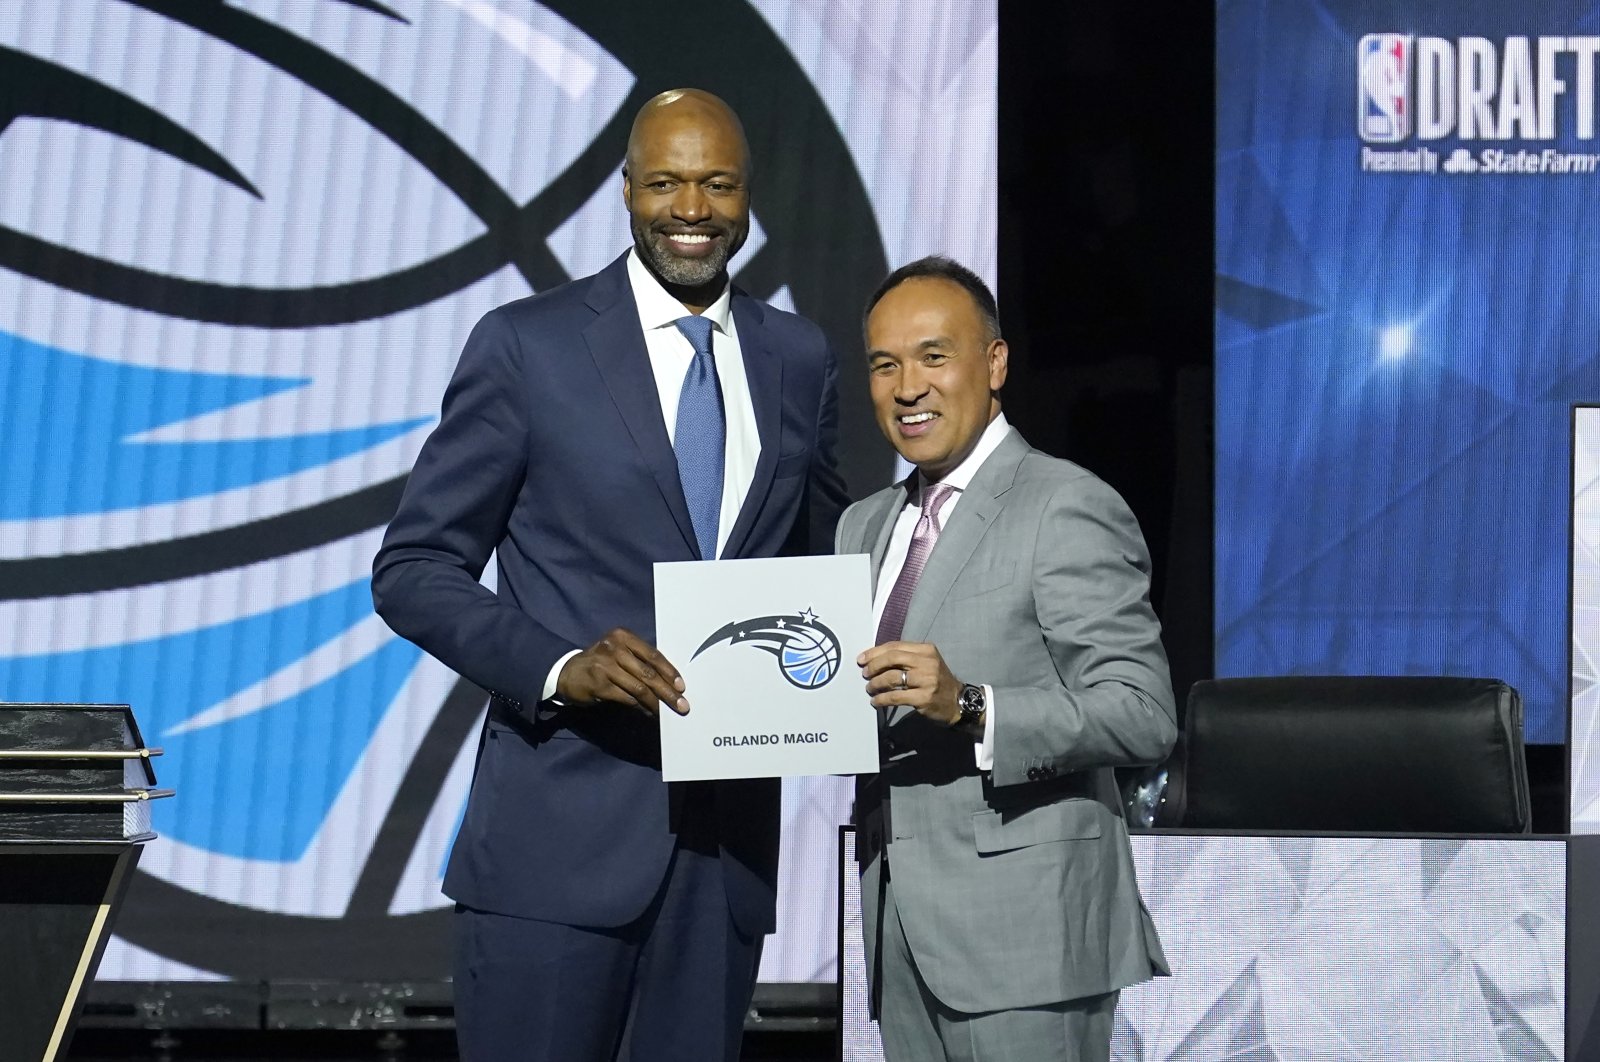 Orlando Magic head coach Jamahl Mosley (L) with NBA Deputy Commissioner Mark Tatum after winning the No. 1 in the 2022 NBA draft lottery, Chicago, U.S, May 17, 2022. (AP Photo)